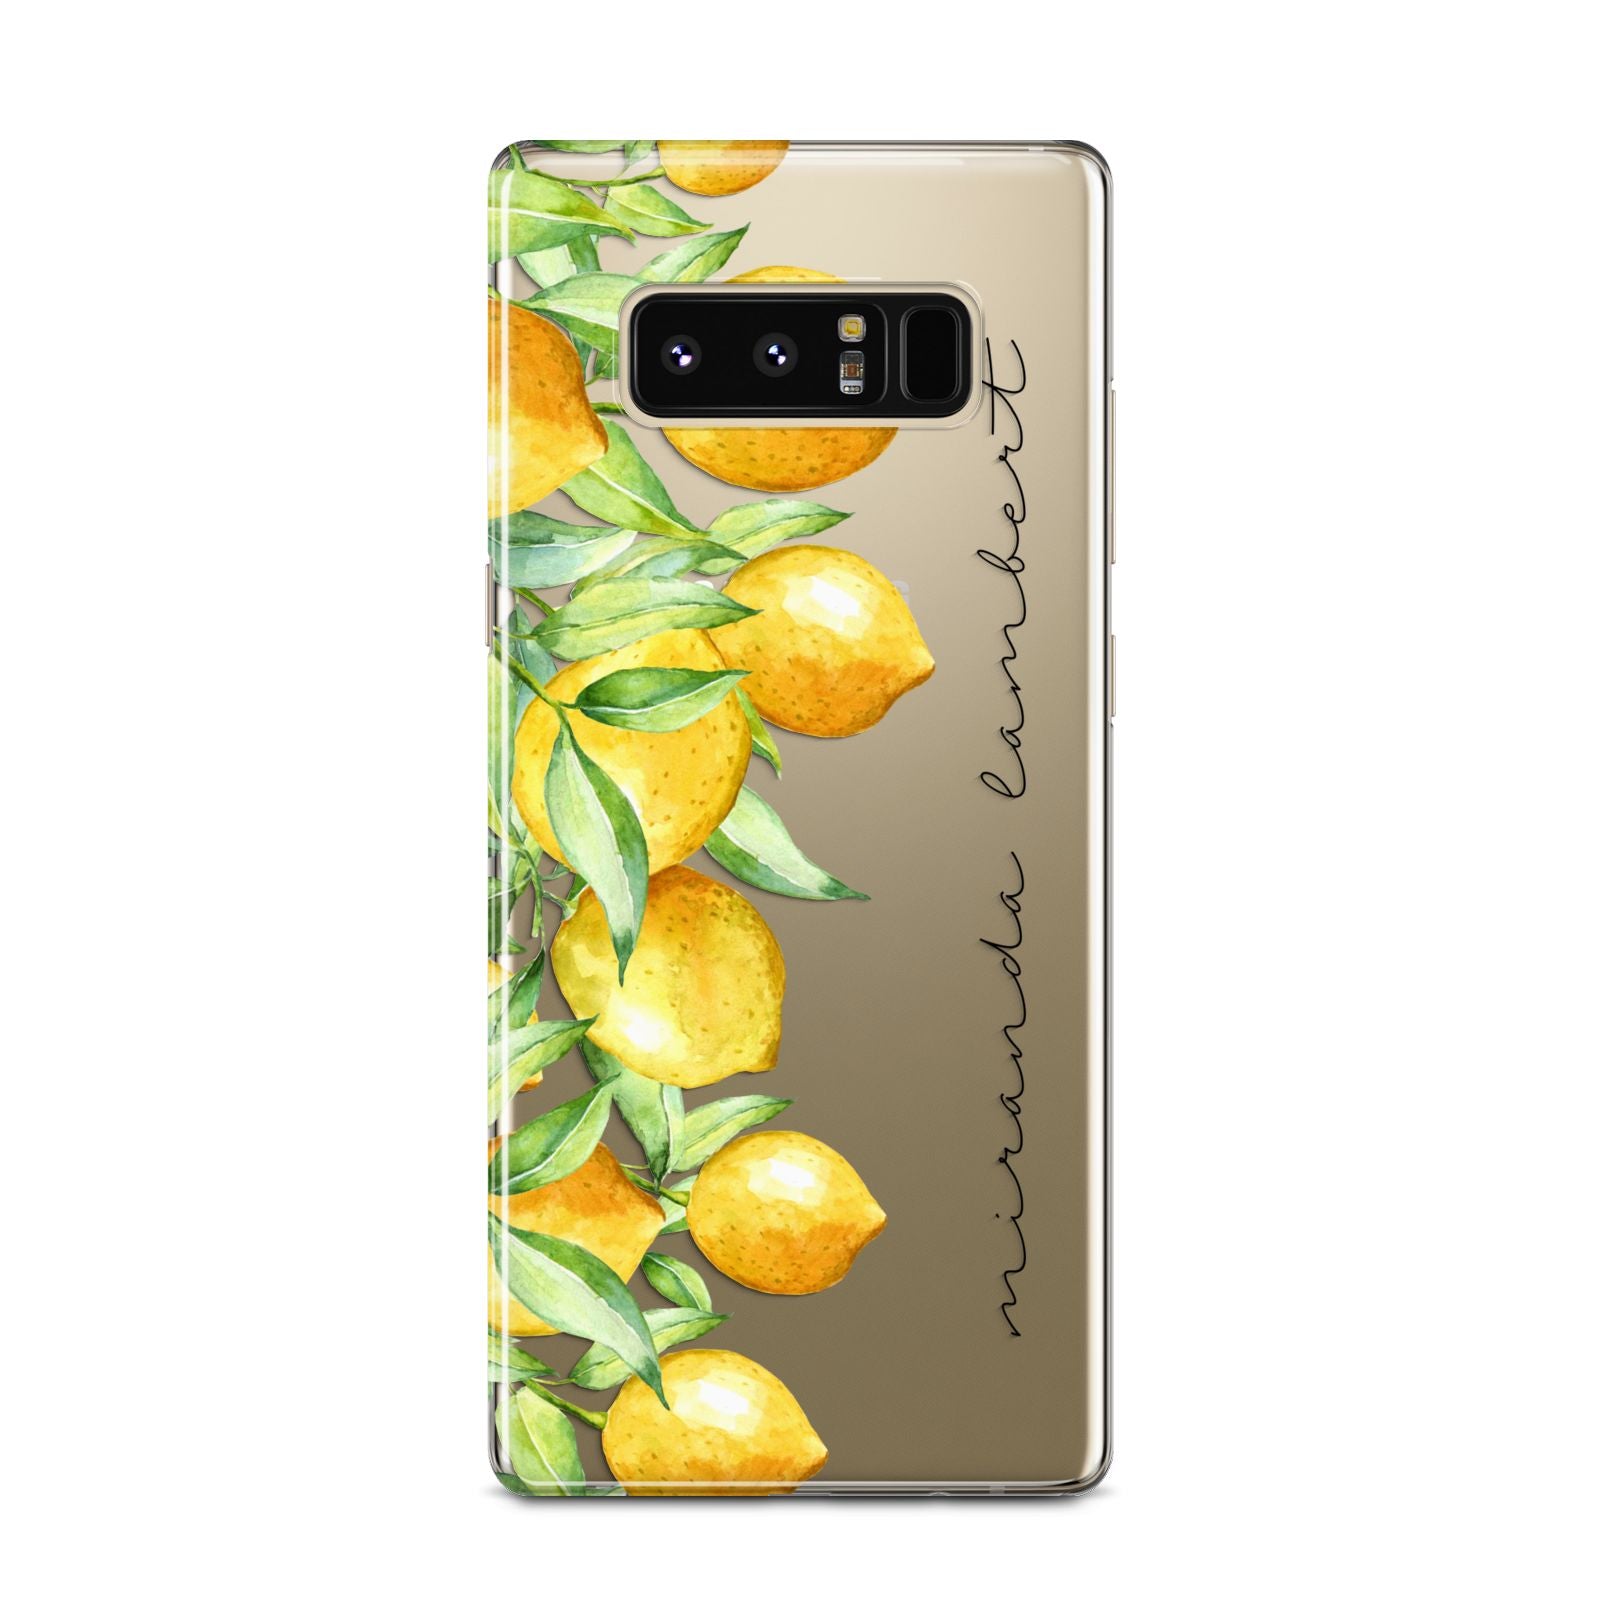 Personalised Lemon Bunches Samsung Galaxy Note 8 Case